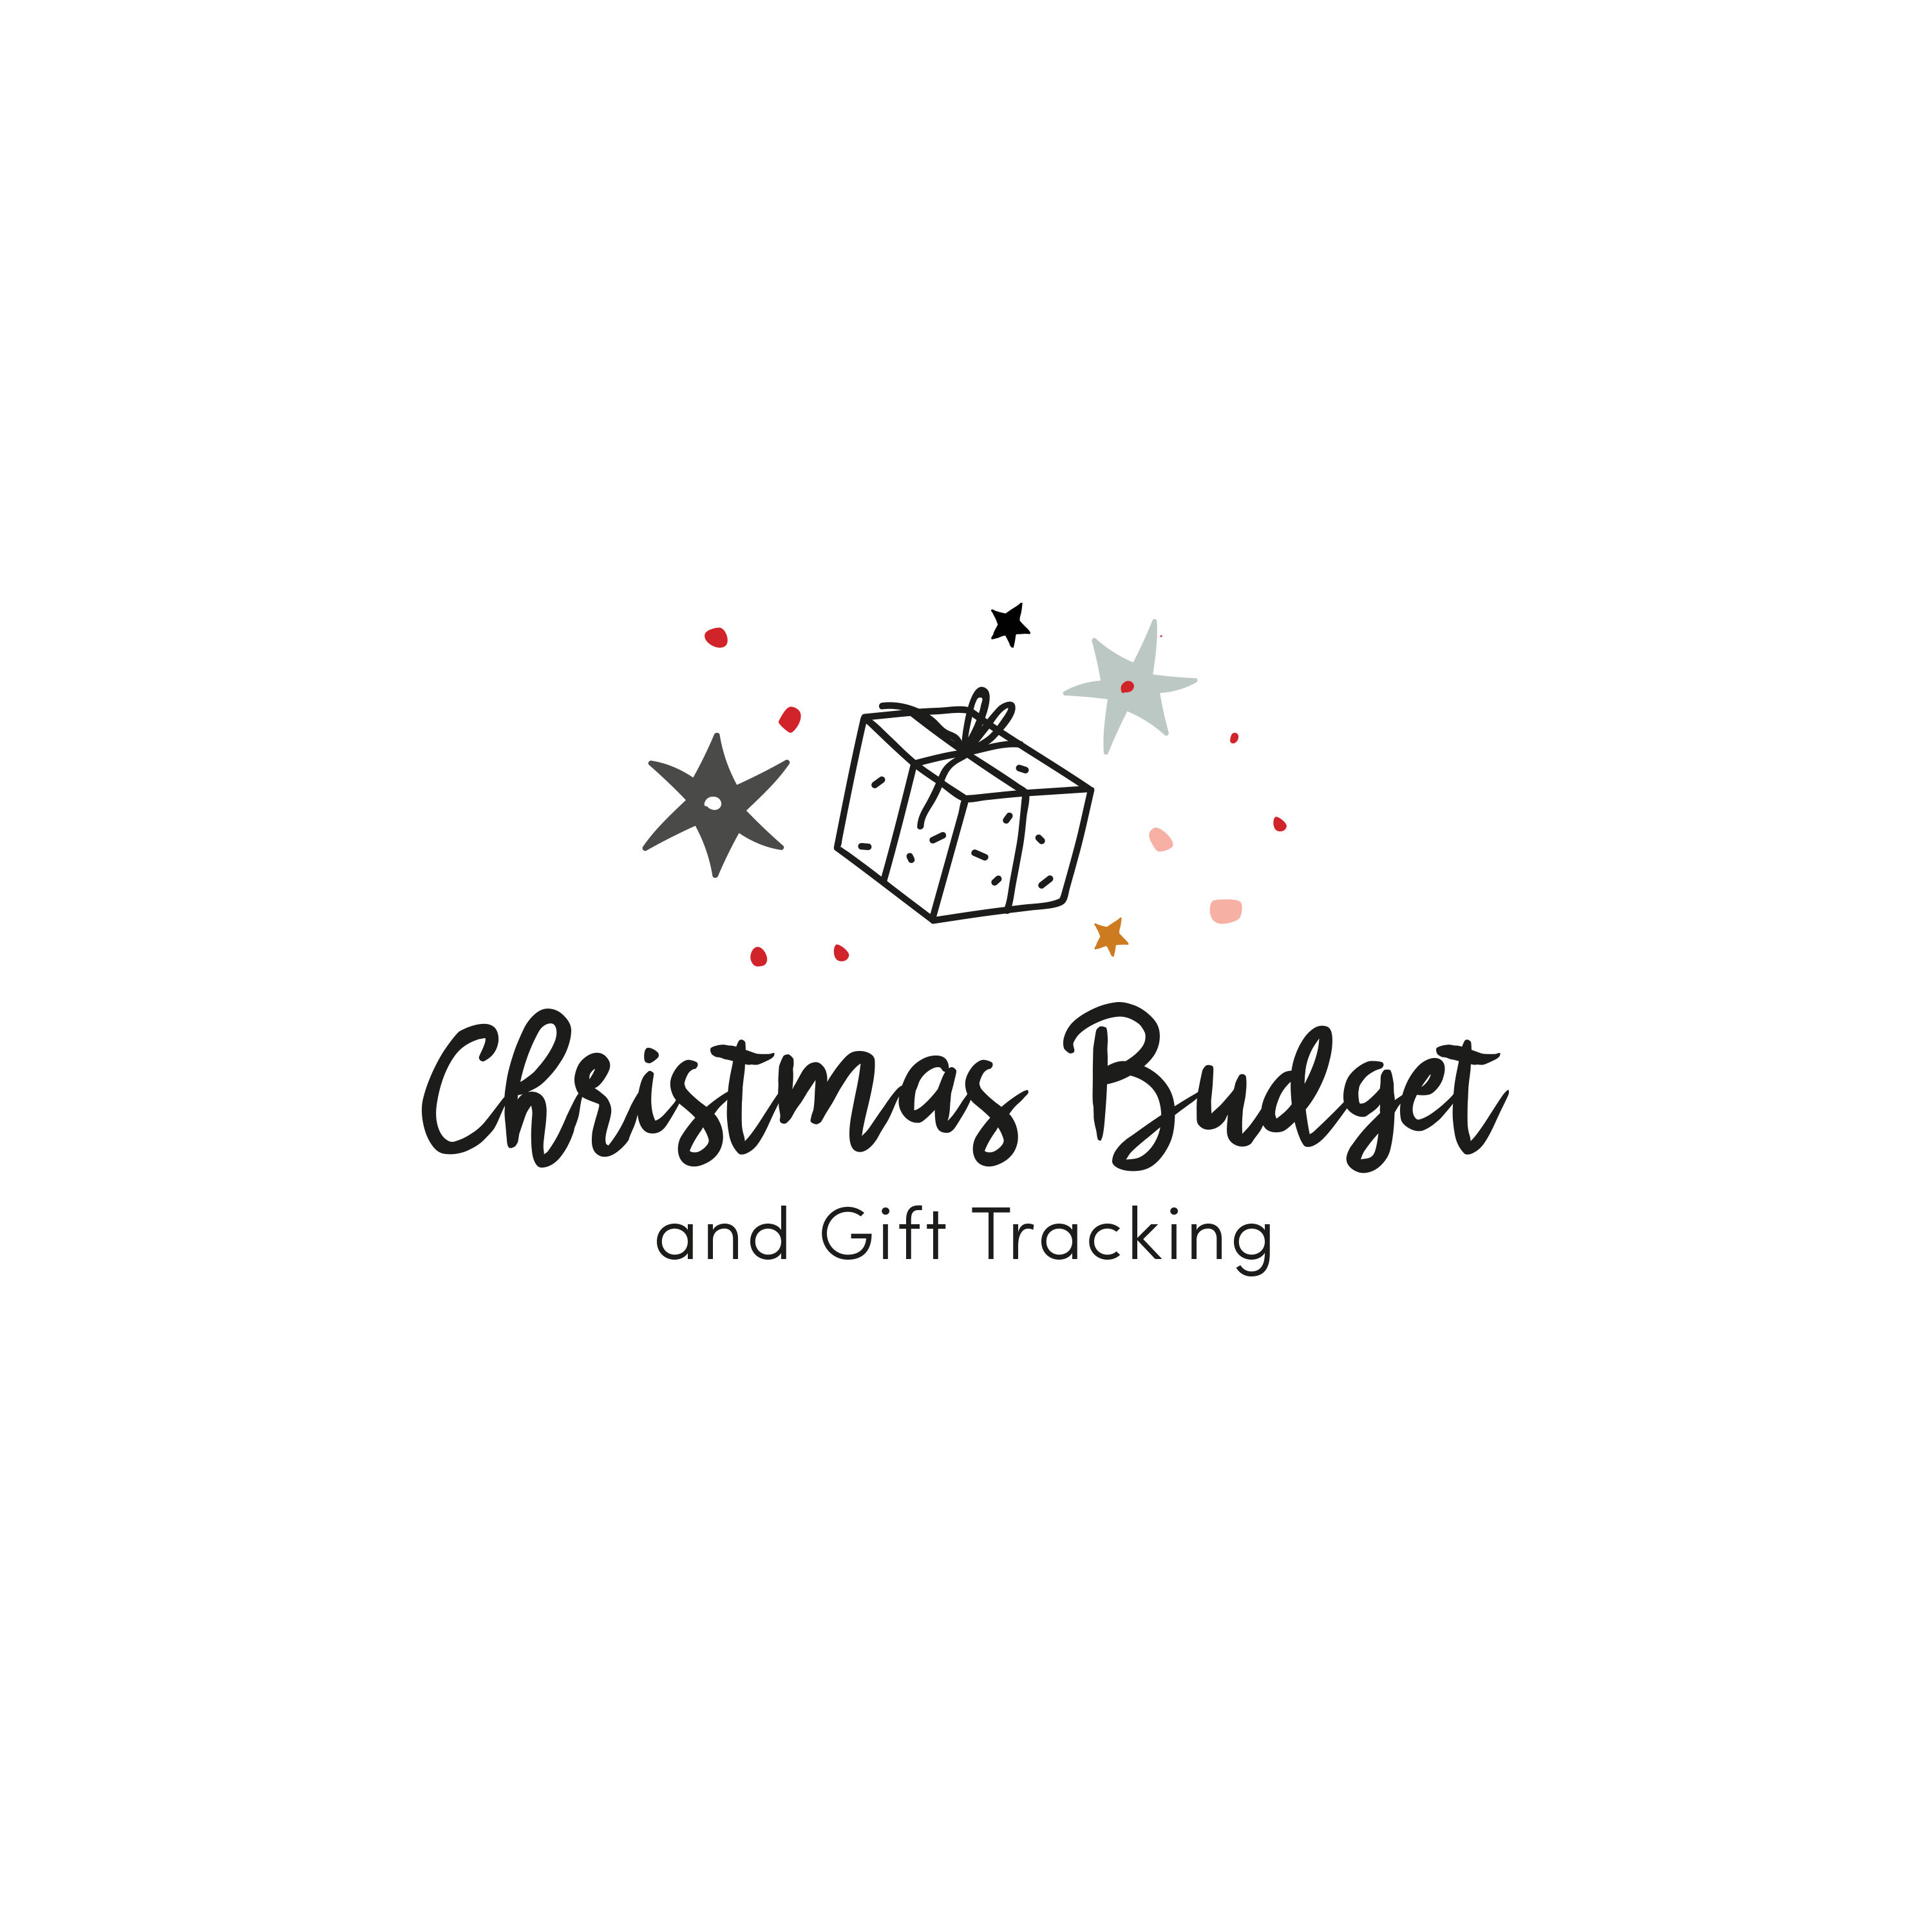 English version of the logo of the christmas budget and gift tracking document made by Les Belles Combines